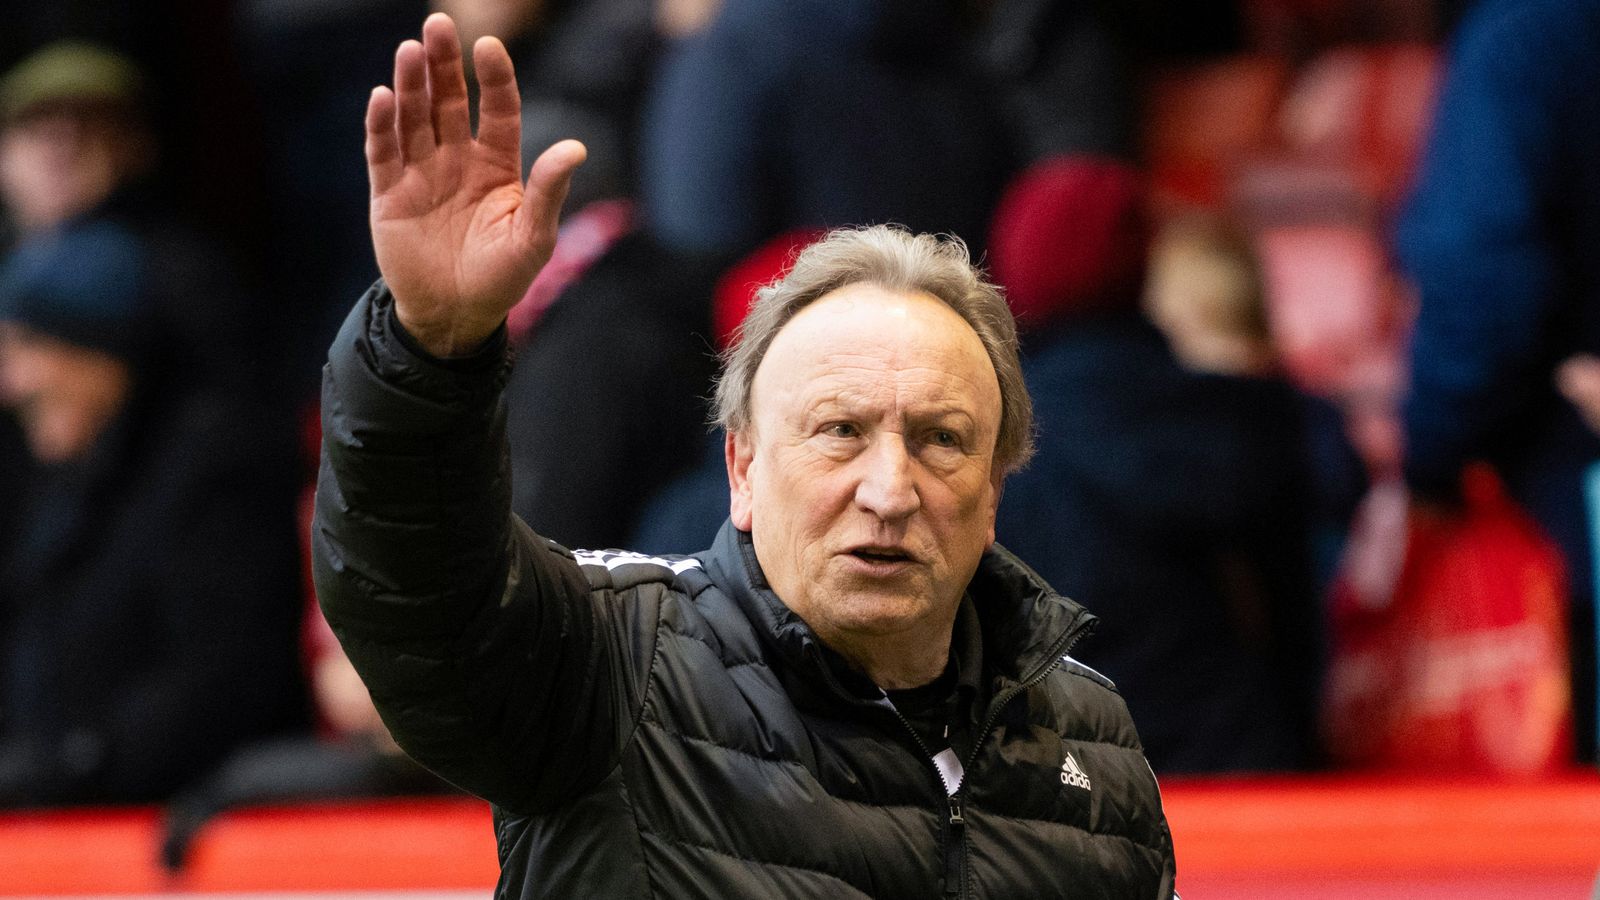 Neil Warnock steps down as Aberdeen interim manager with Dons search for new boss at advanced stage | Football News